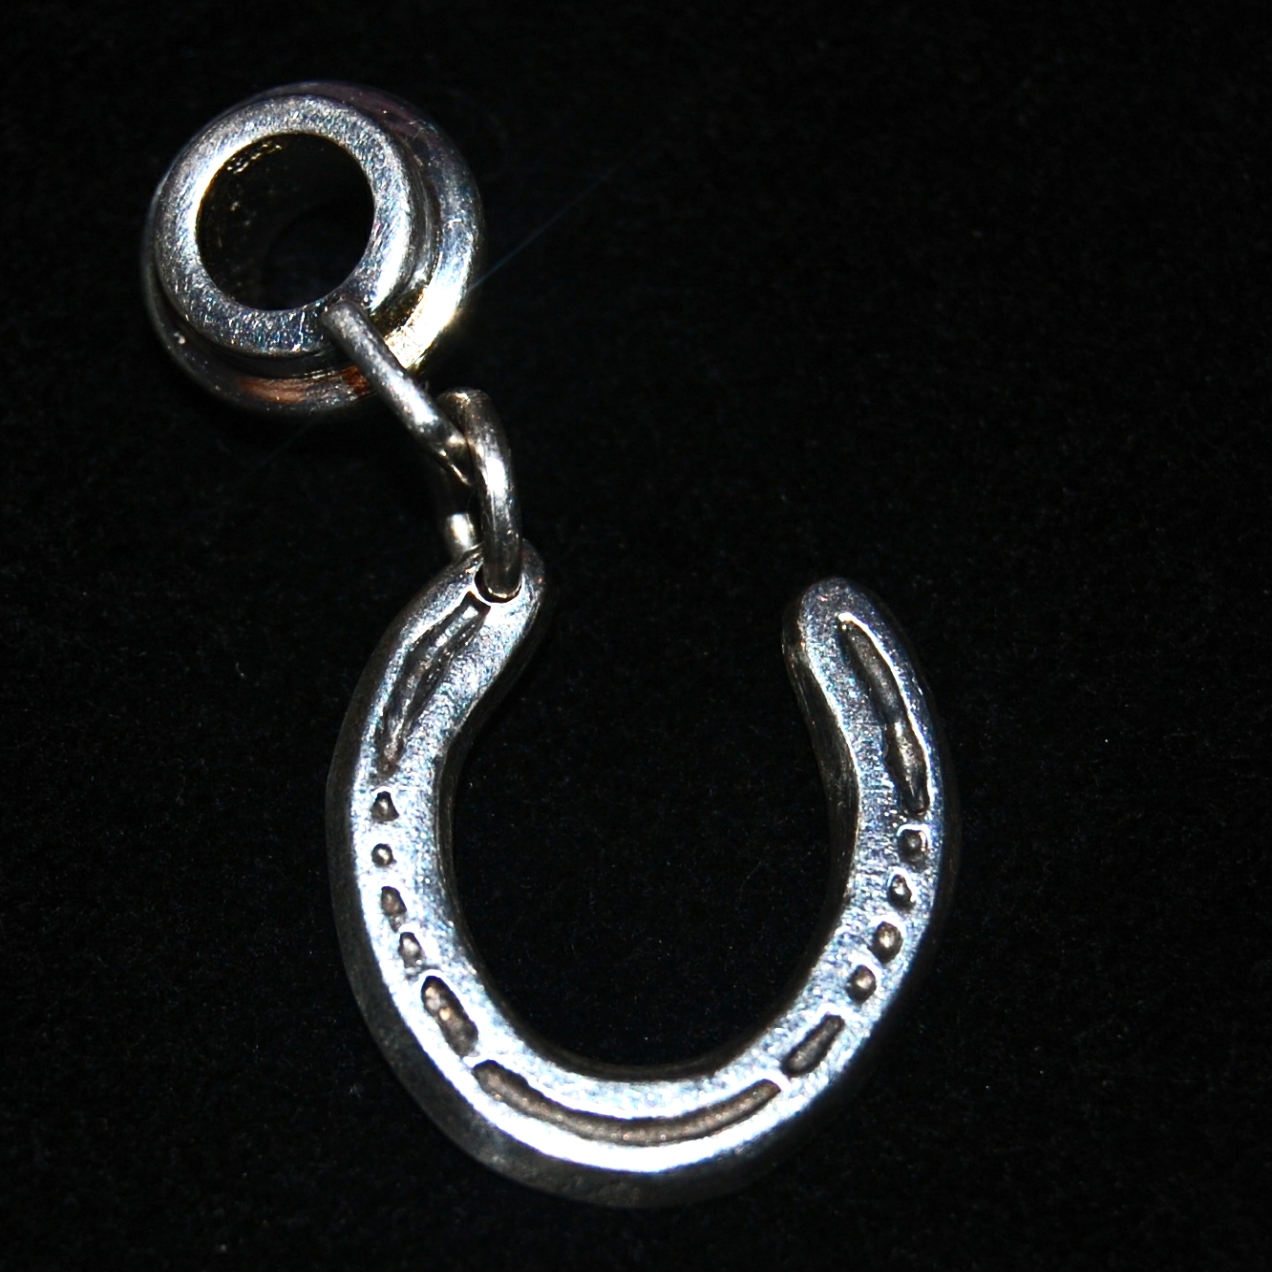 Your own horse's unique shoe cut by hand in a silver charm, securely attached to a charm carrier ready to add to your bracelet.